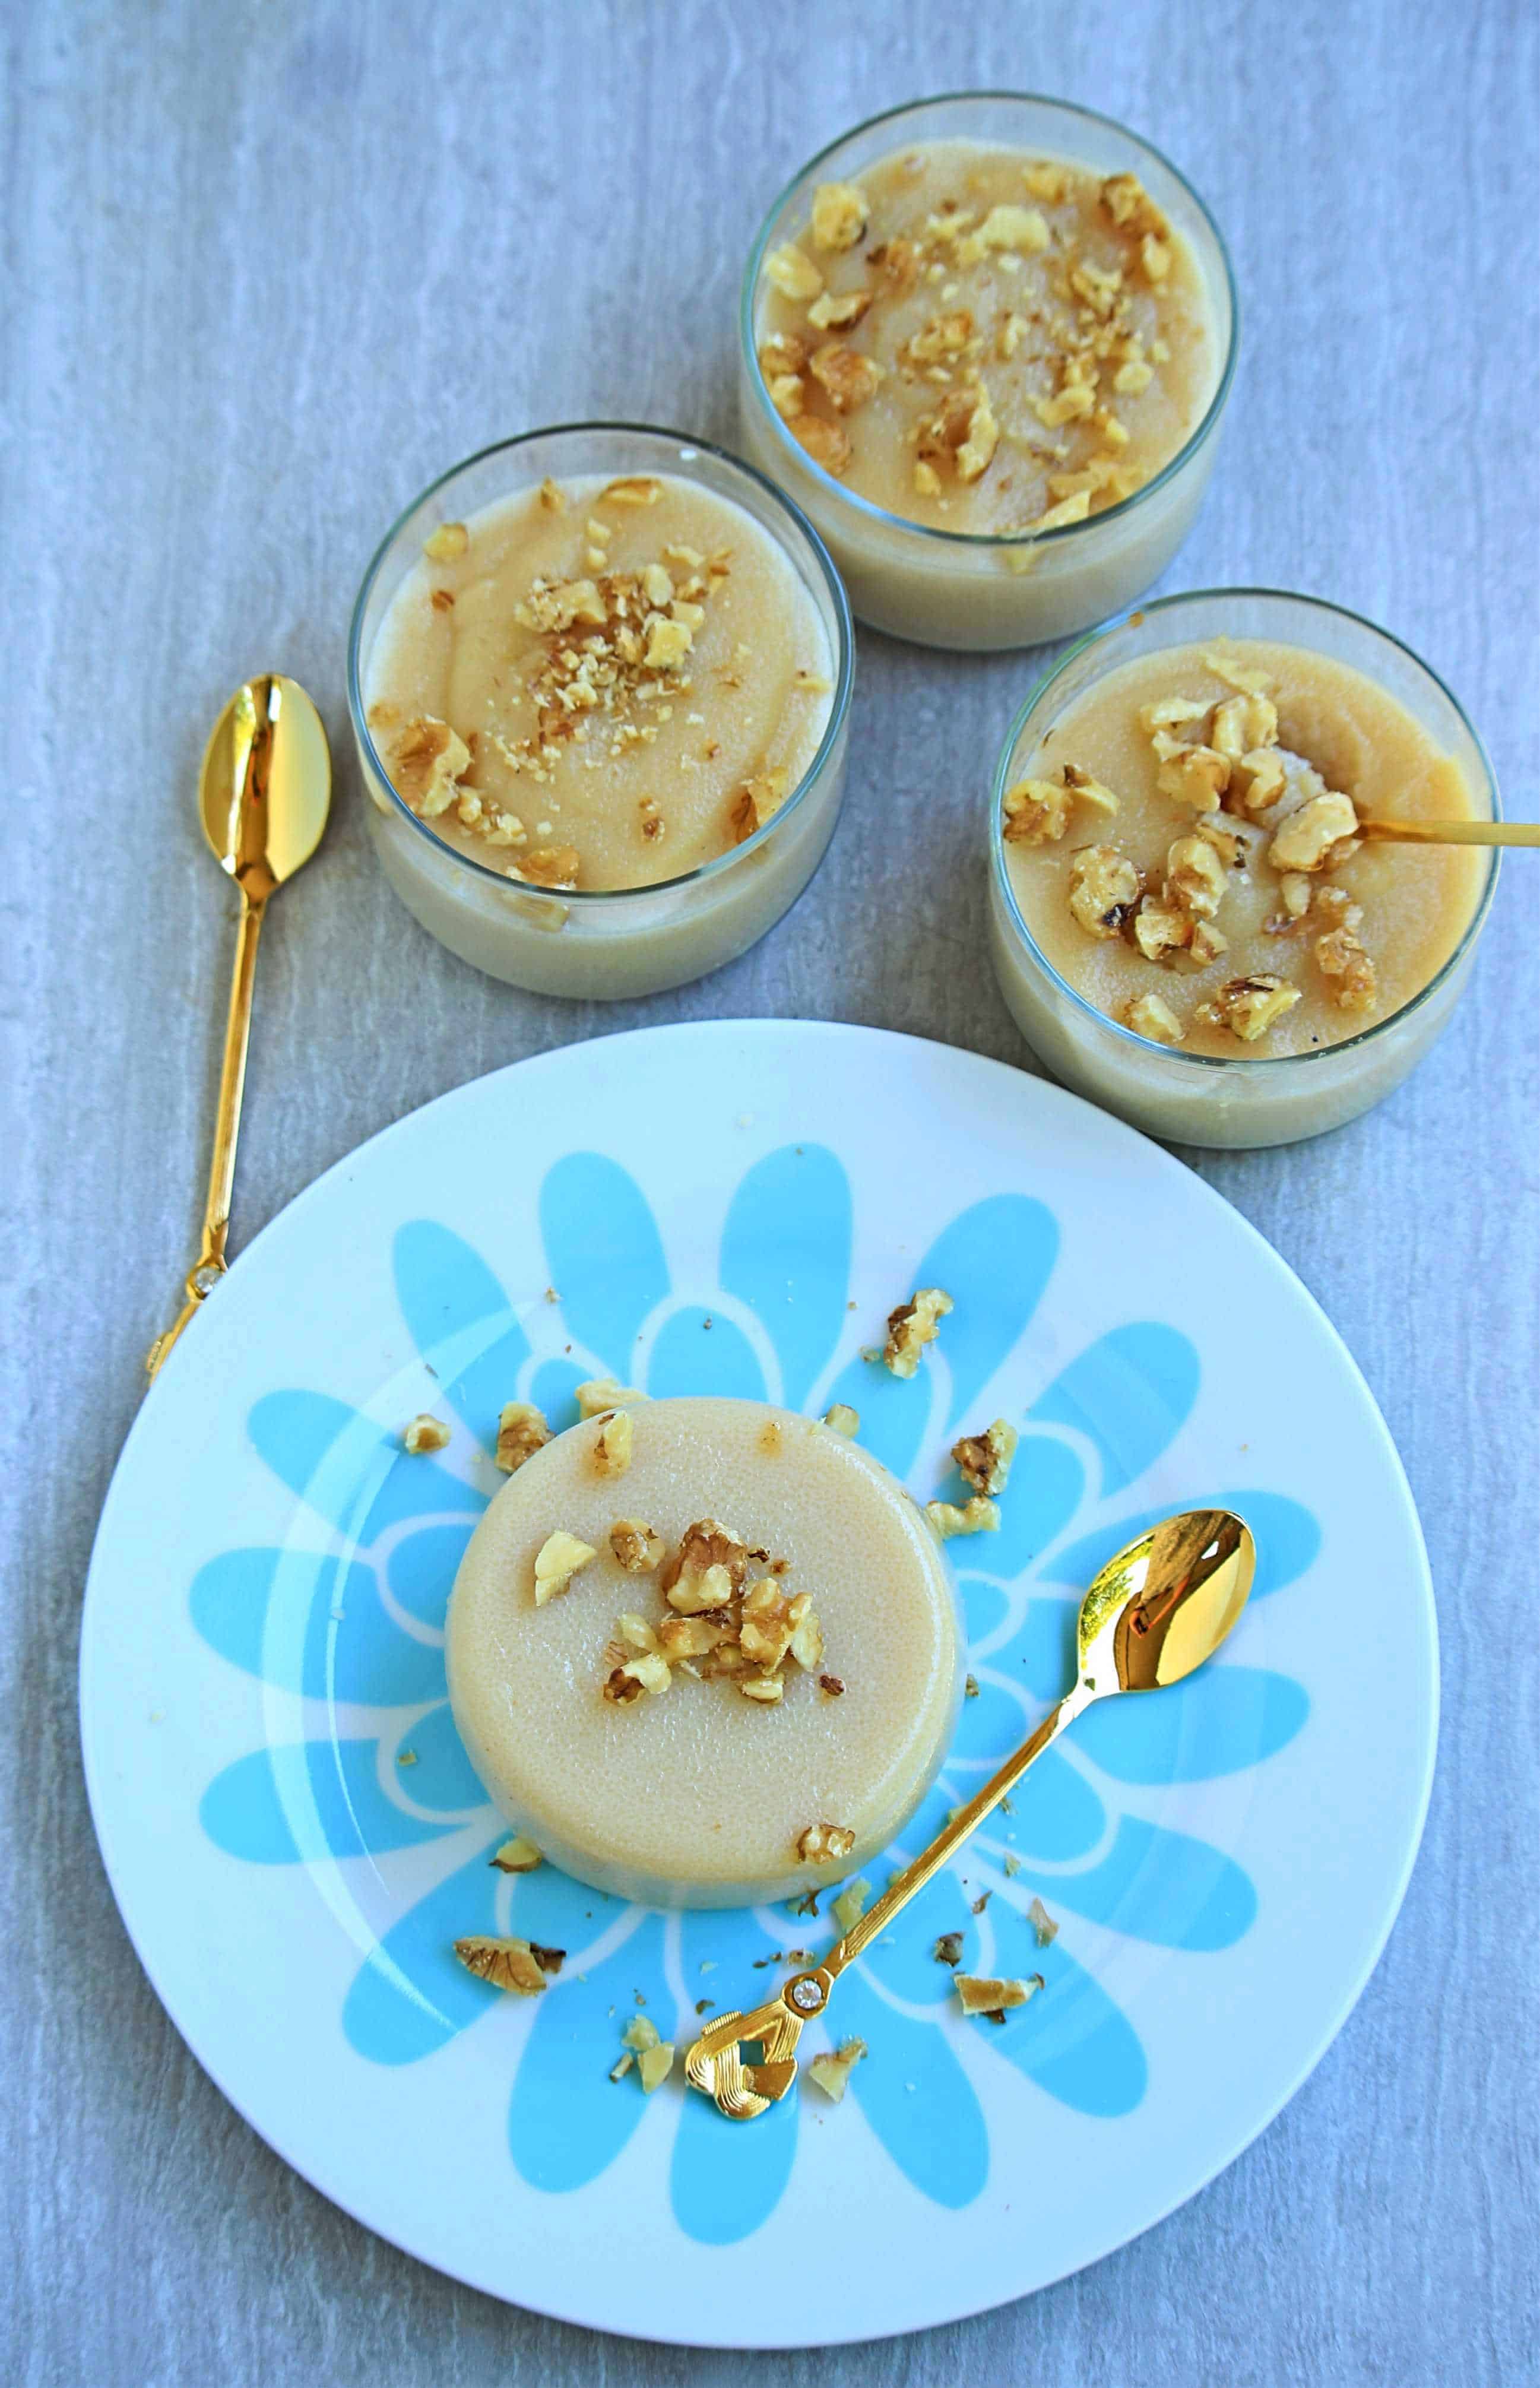 Turkish Semolina Pudding presented in glass bowl and plate